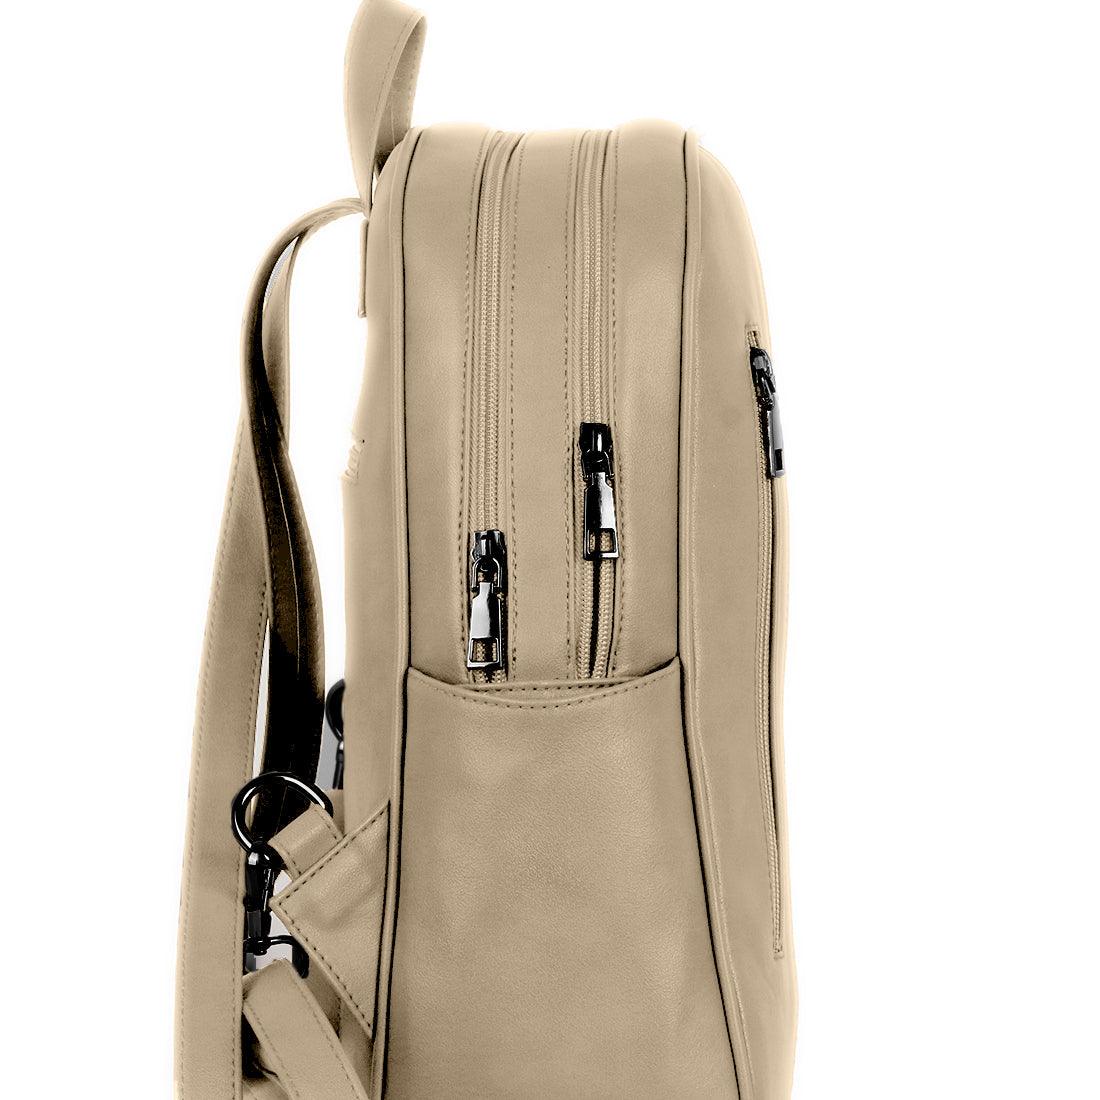 Beige Mixed Backpack Dream Catcher - CANVAEGYPT